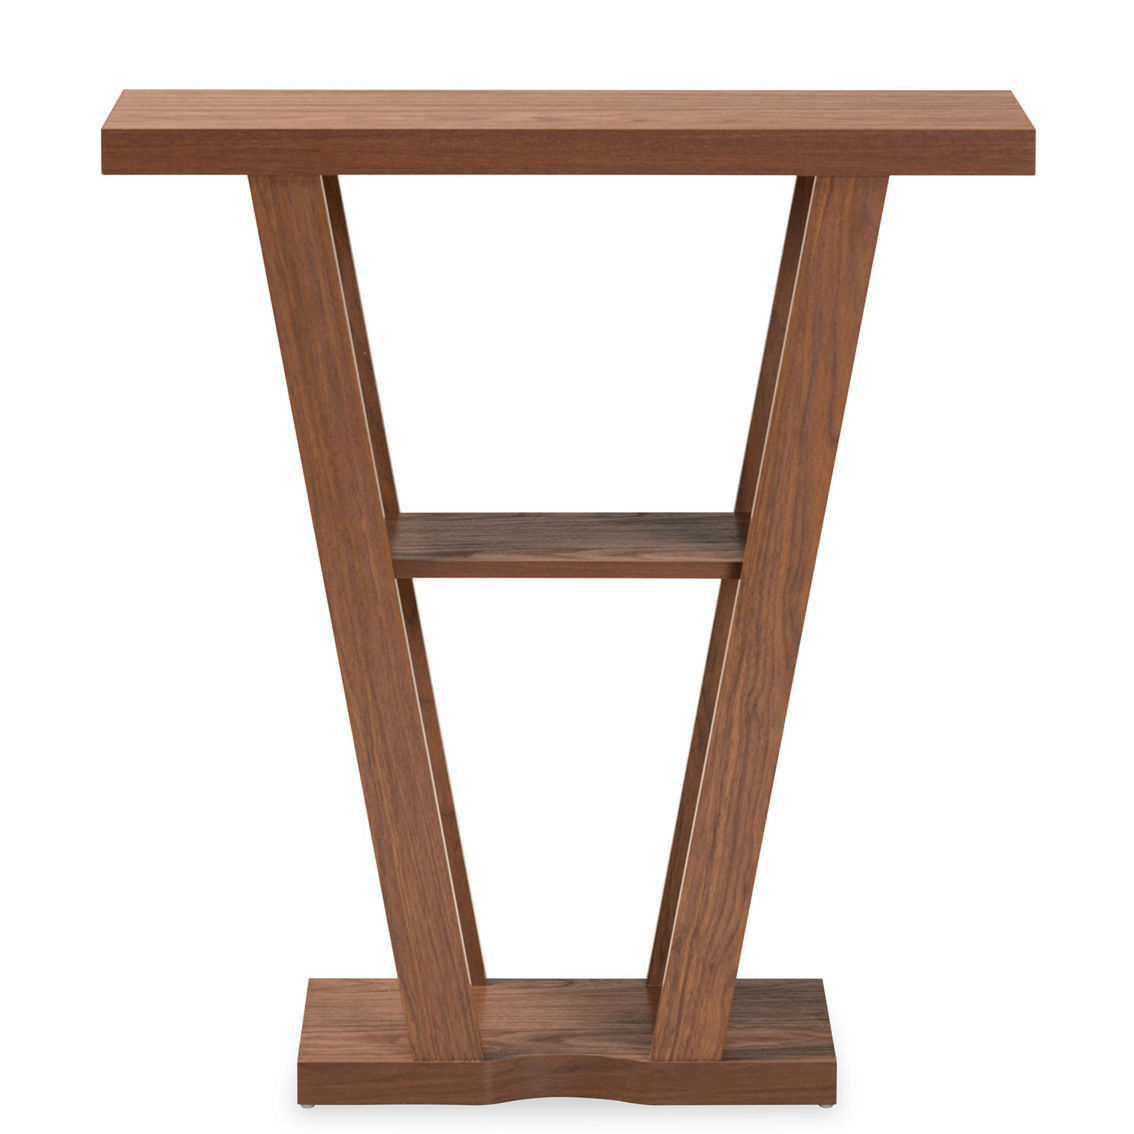 Baxton Studio Boone Walnut Brown Finished Wood Console Table - Image 2 of 5